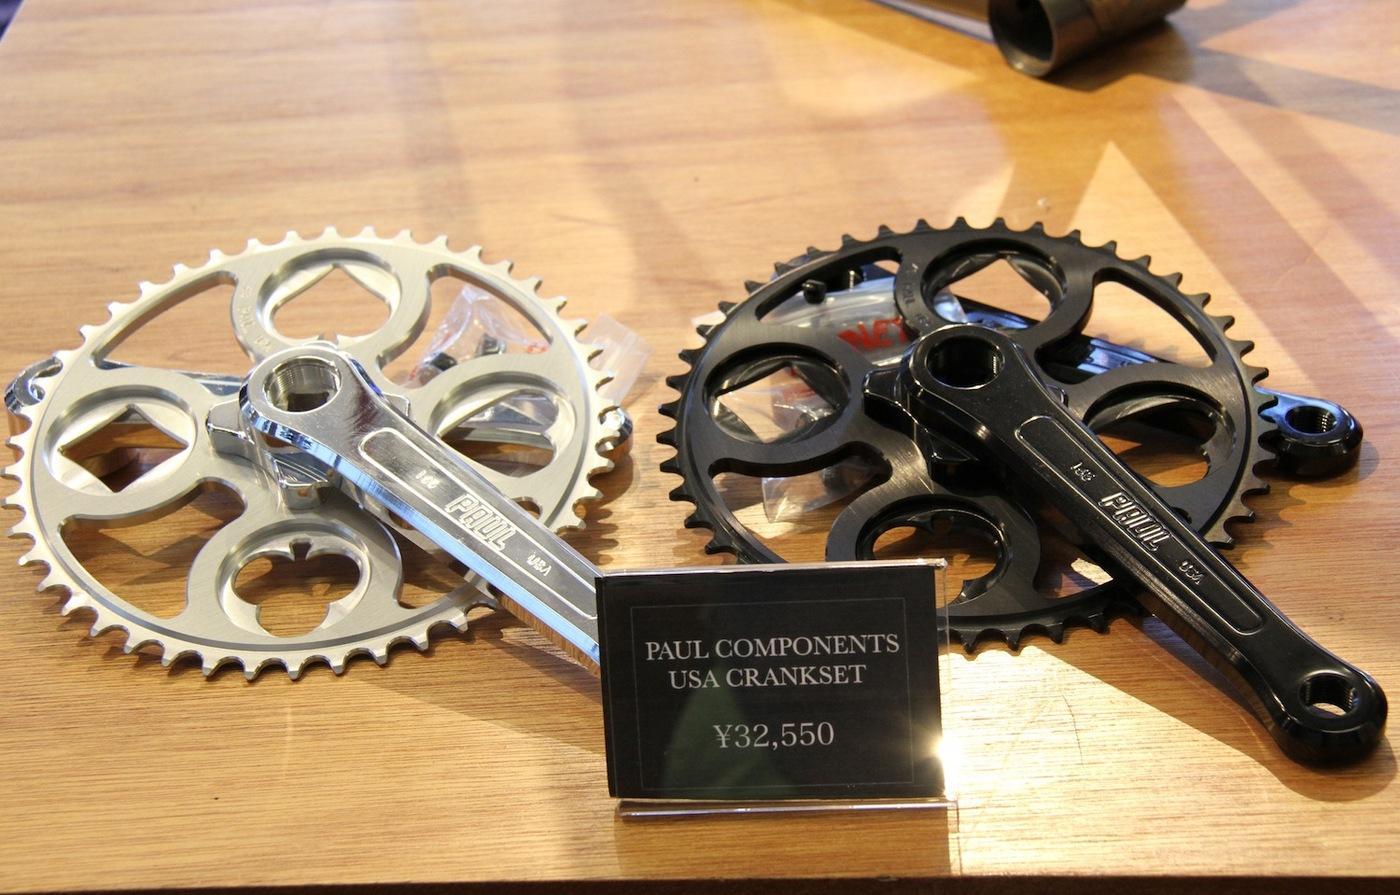 Special feature on Paul Components USA CRANK! ! | ブローチャーズ 